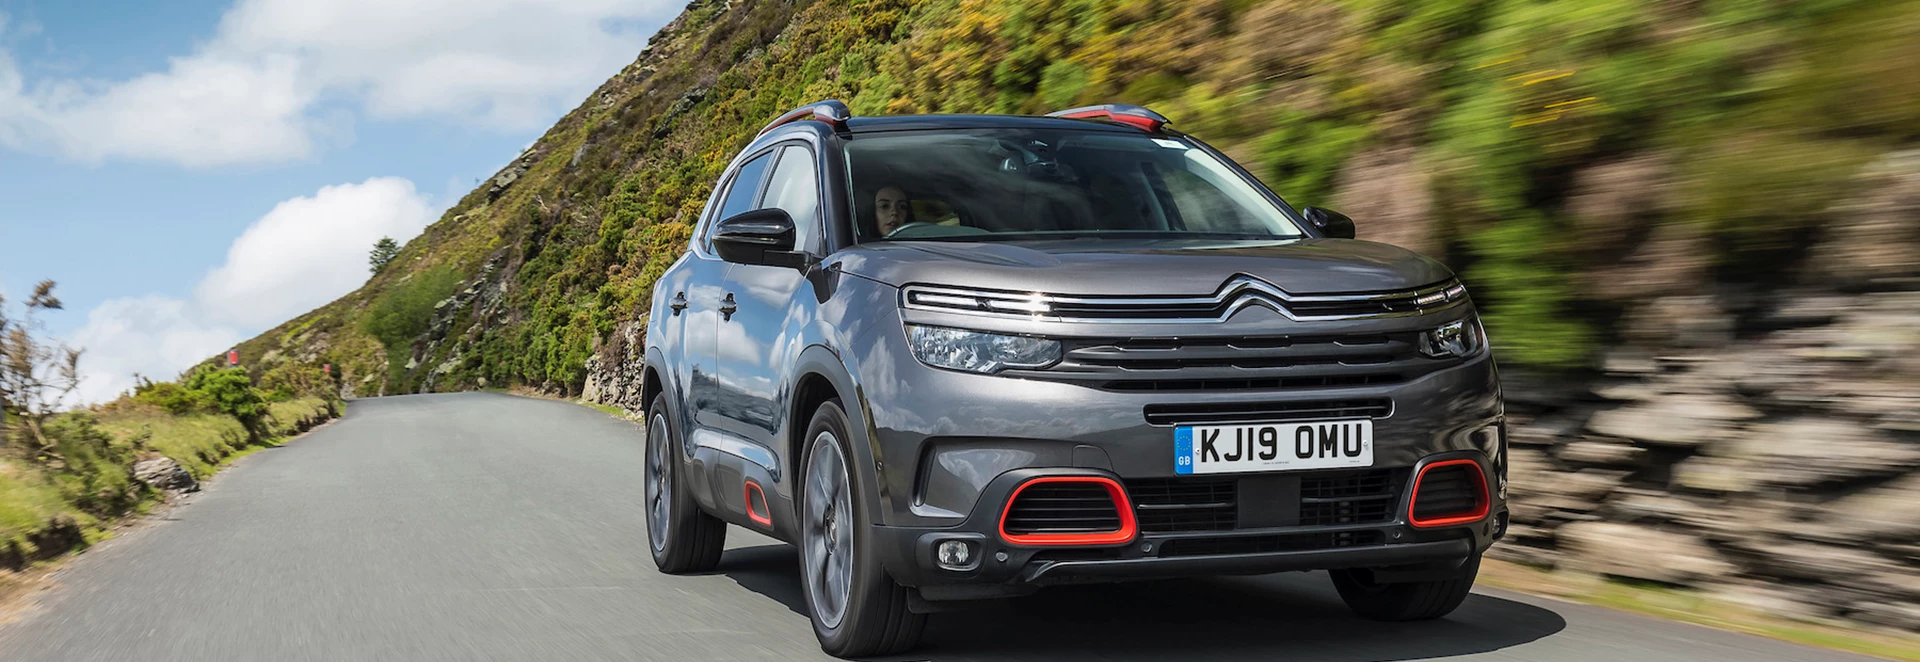 A quick guide to the Citroen range